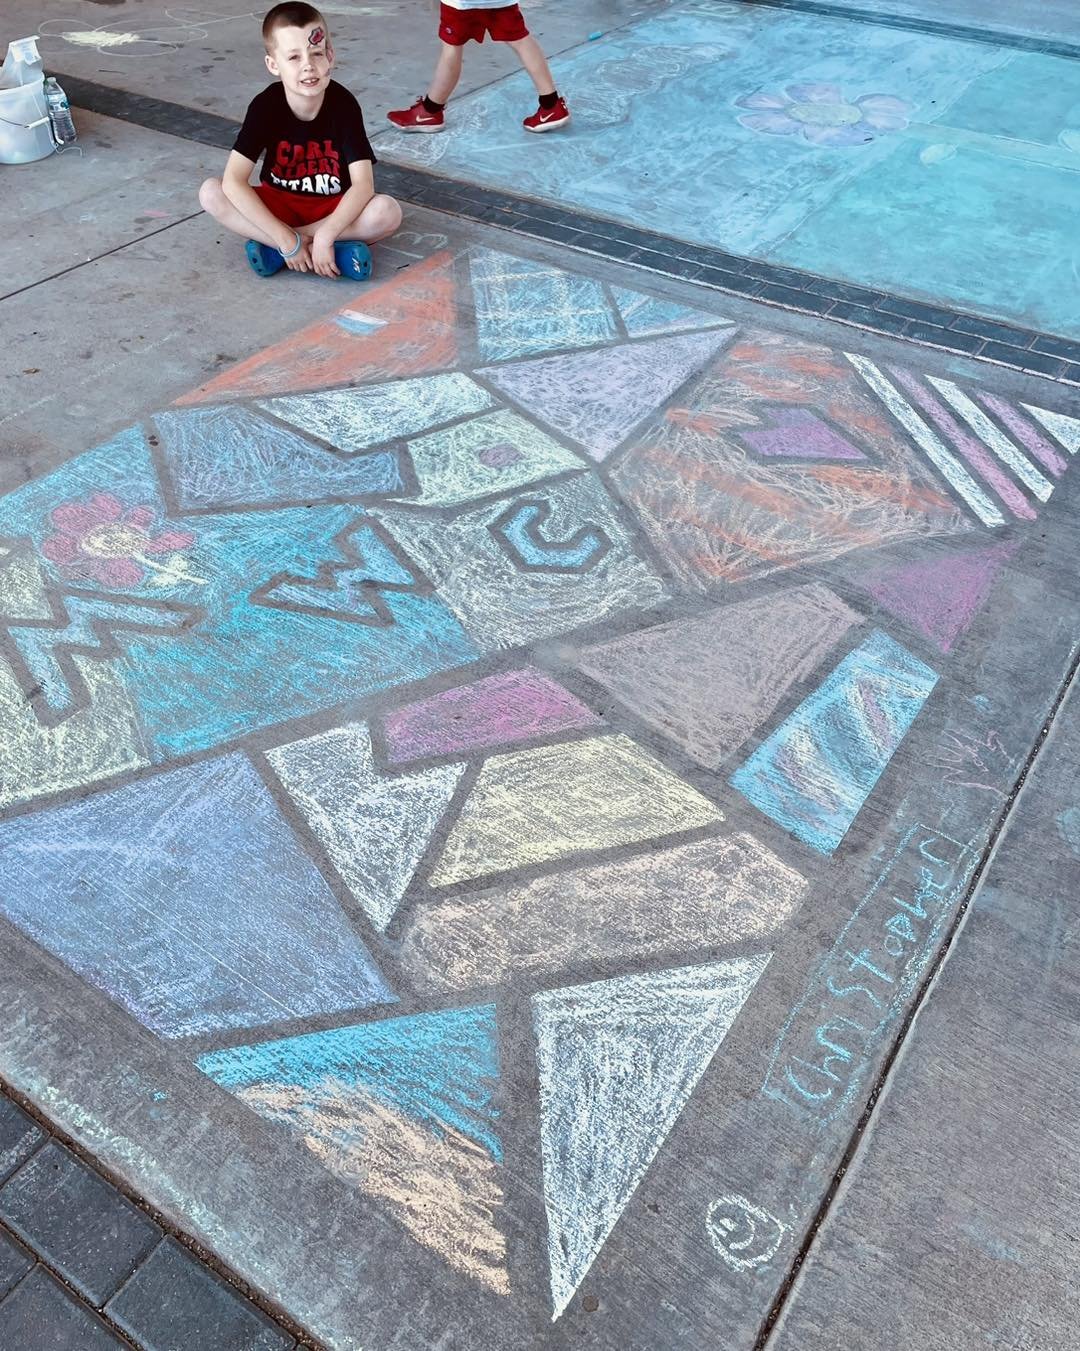 JSL volunteered at the Covered in Color event in Midwest City's new SkyTrain Hangar at W.P. Bill Atkinson Park in Town Center Plaza this weekend. The event featured local artists showcasing their talents in a sidewalk chalk competition. 

Excitingly,